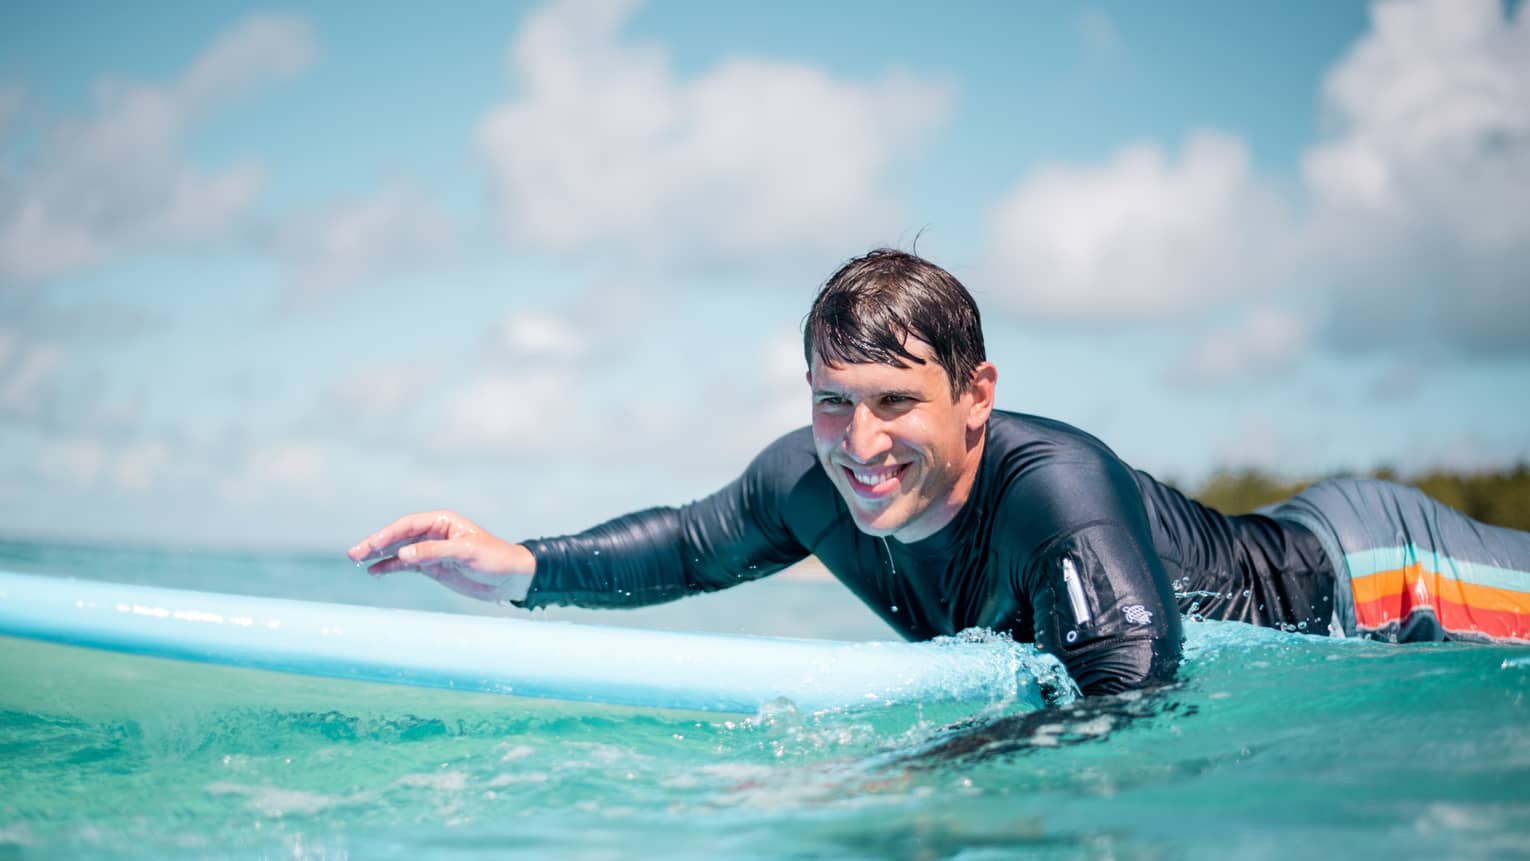 Man in rash guard smiling while paddling on blue surfboard in blue-green water